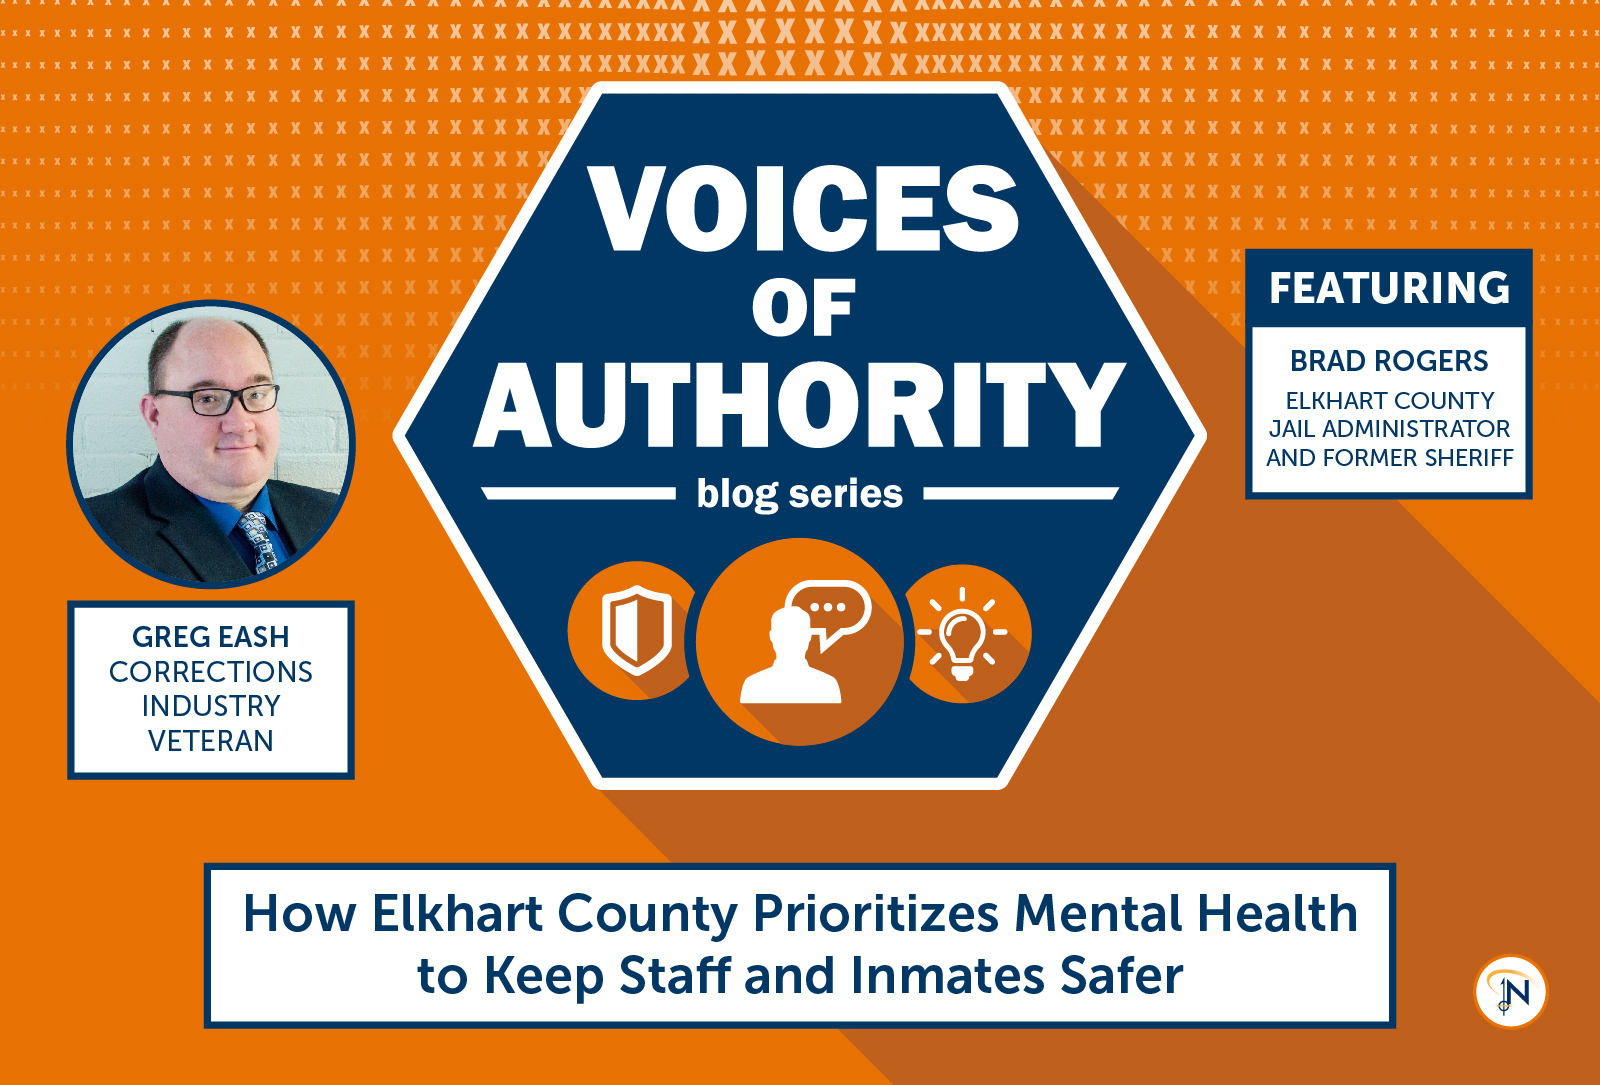 Voices of Authority: How Elkhart County Prioritizes Mental Health to Keep Staff and Inmates Safer